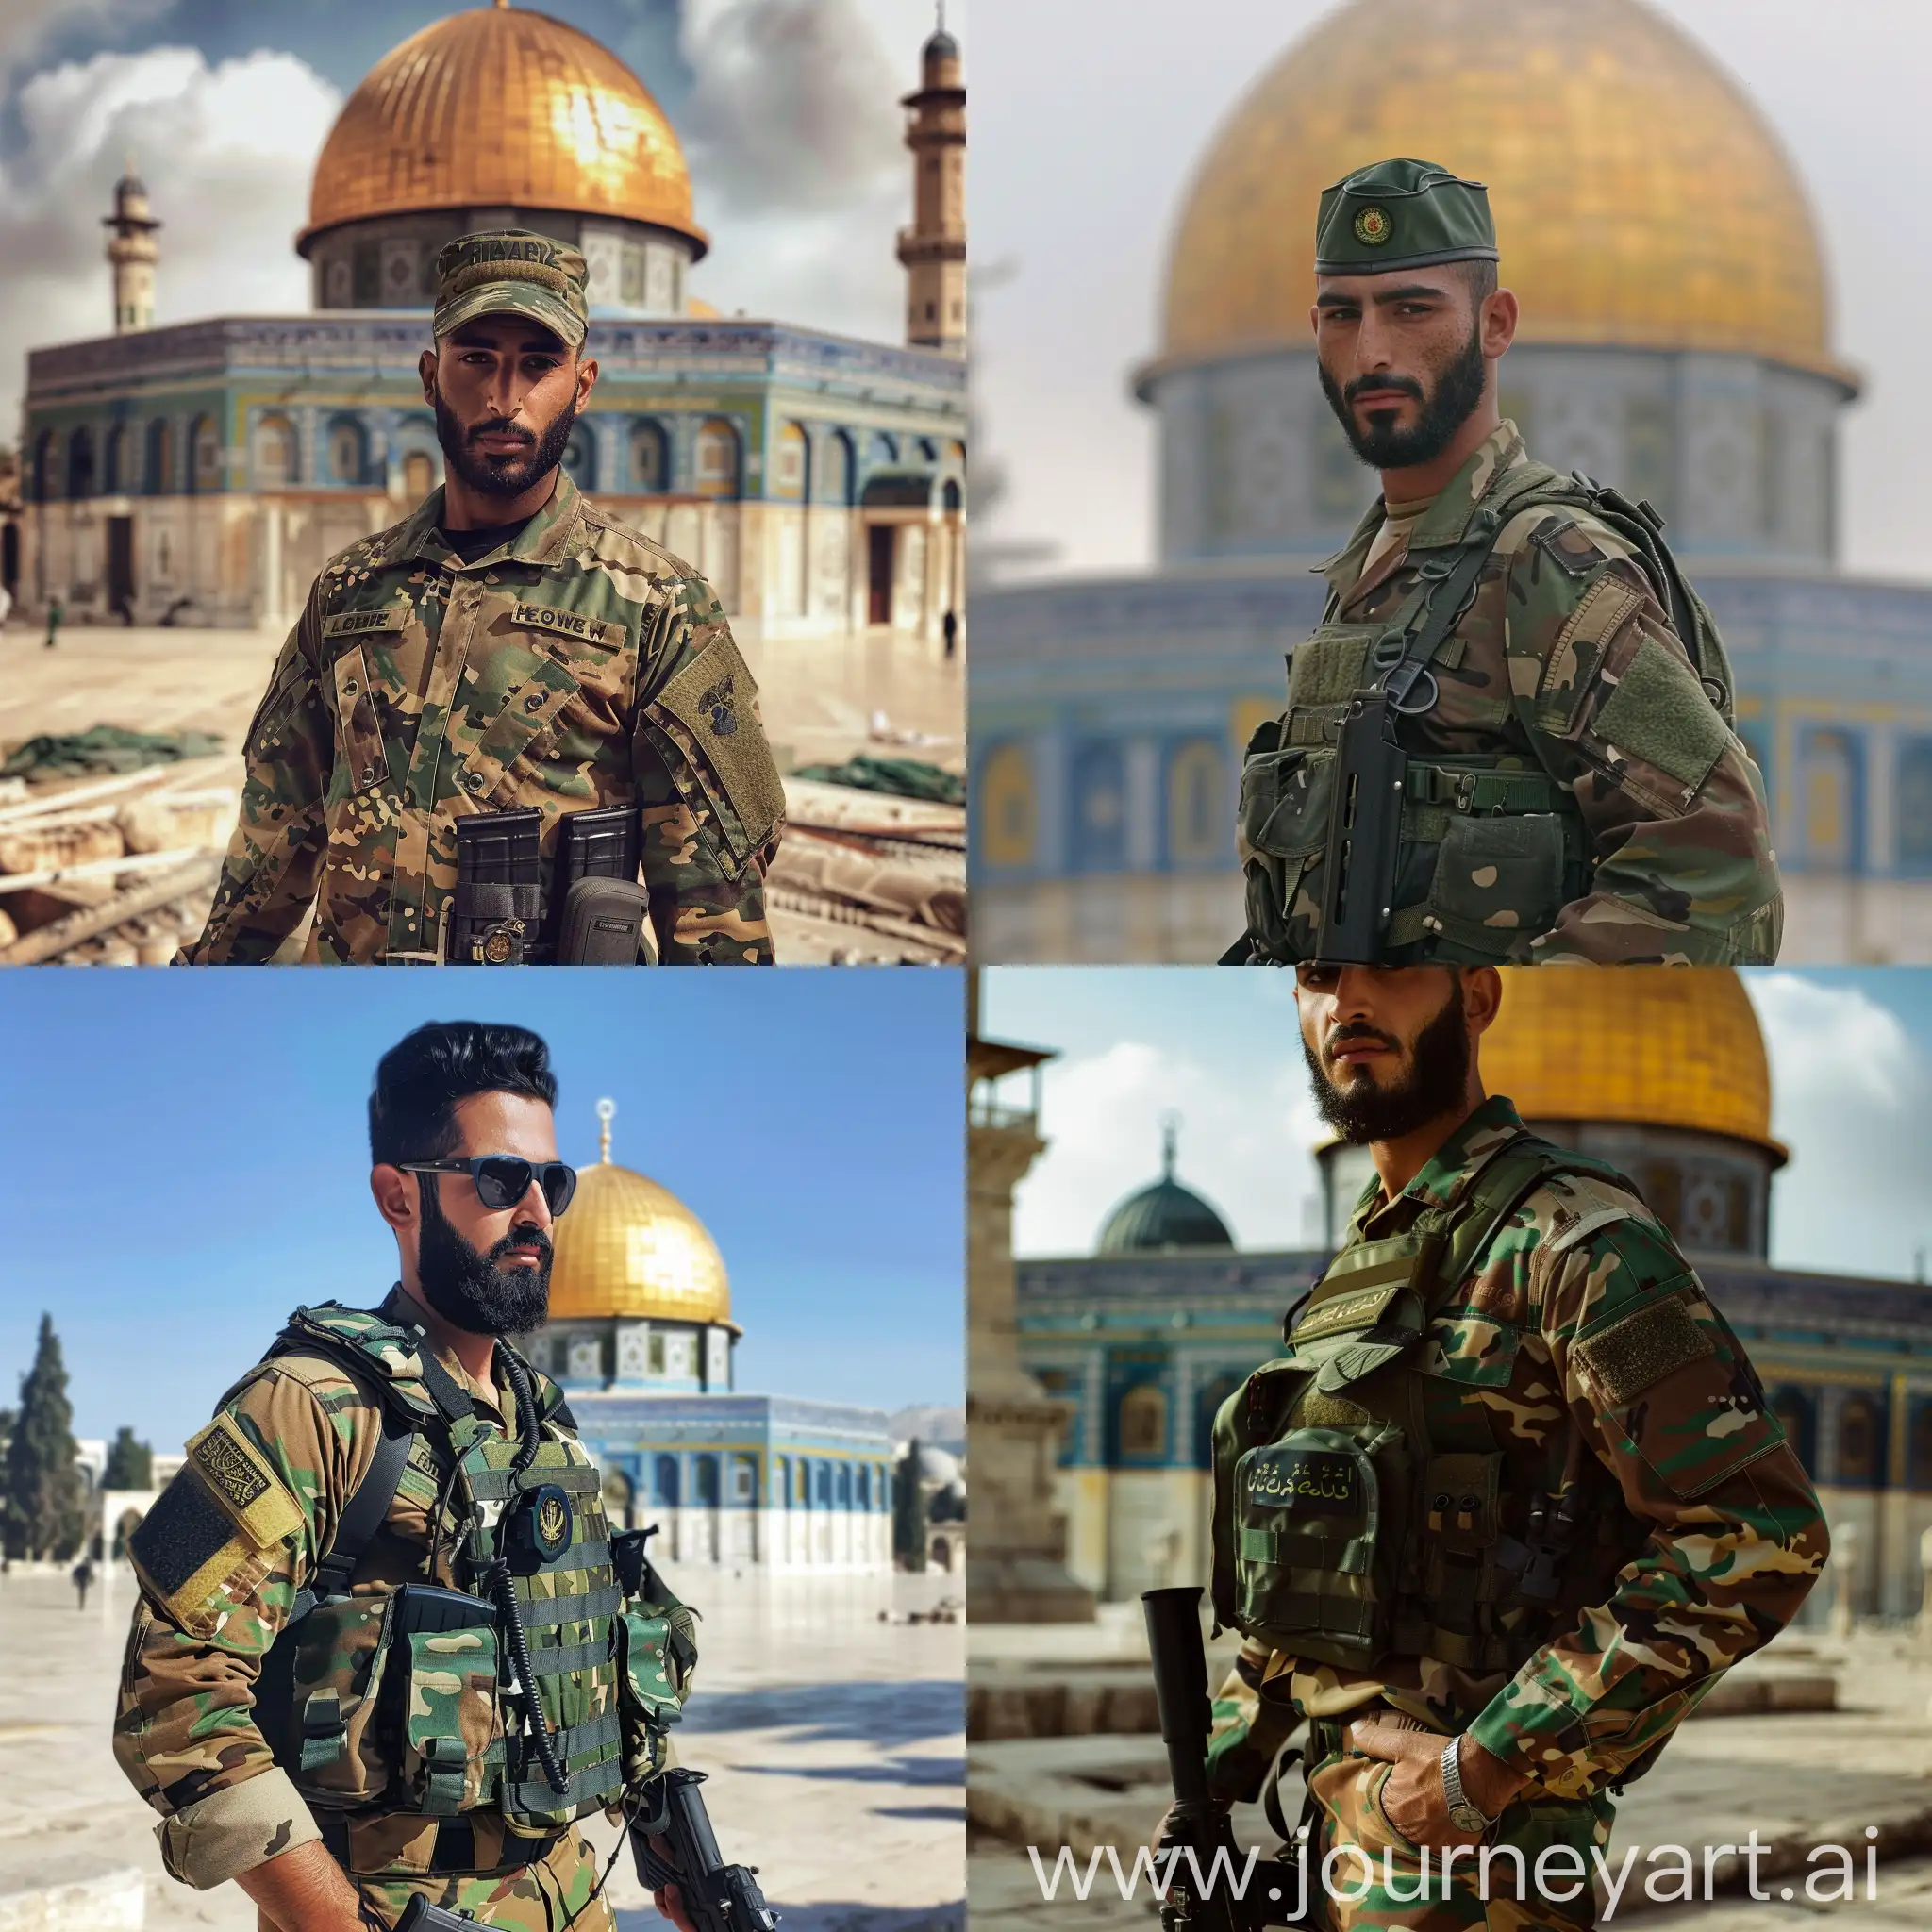 Hezbollah-Soldier-in-Camouflage-Uniform-with-Dome-of-the-Rock-Mosque-in-Palestine